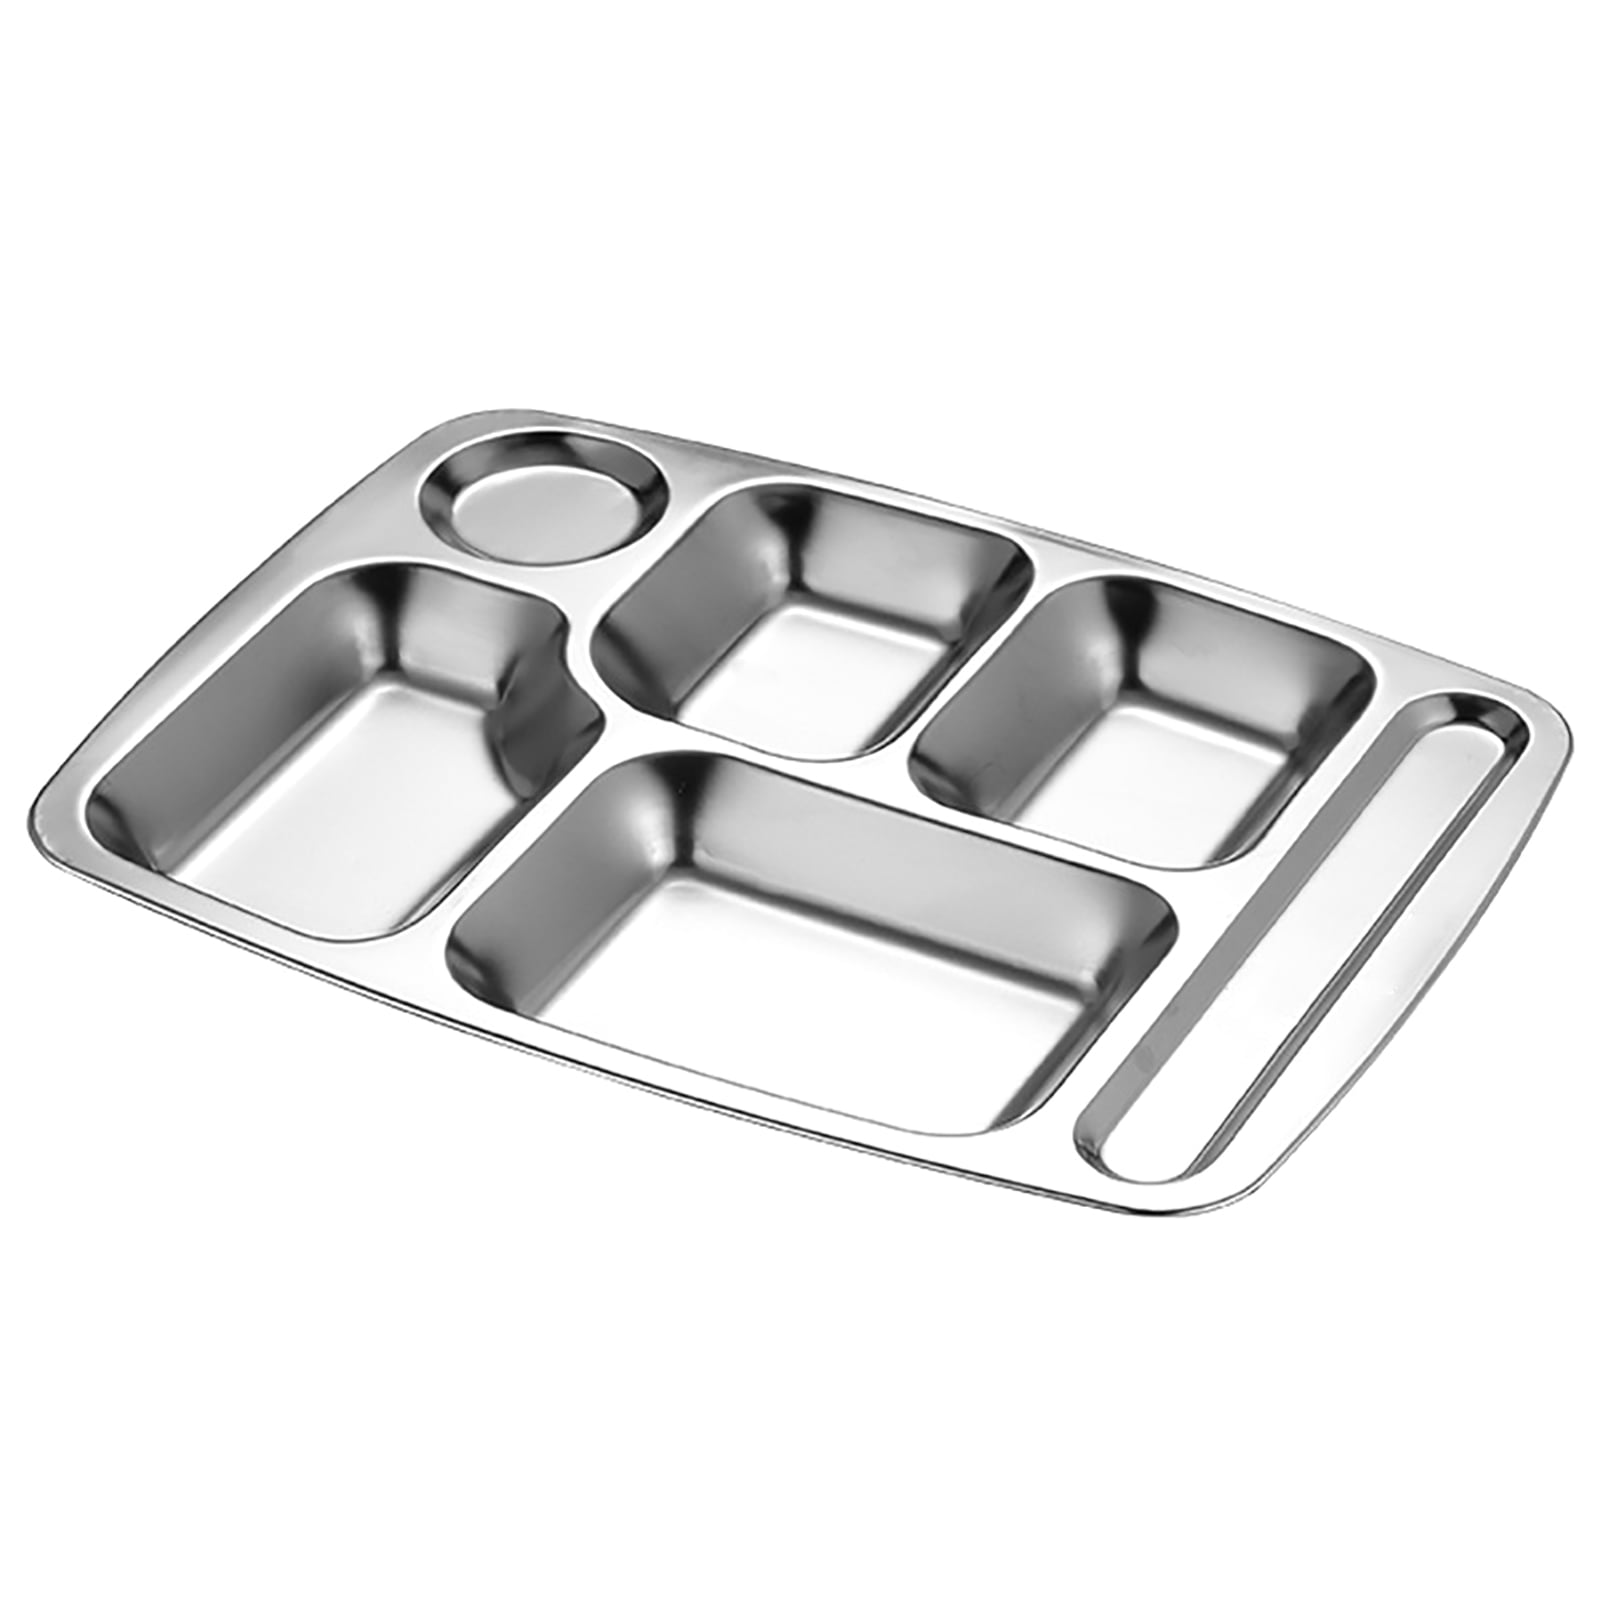 4/6 Section Stainless Steel Divided Dinner Tray Lunch Food Snack Plate Container 